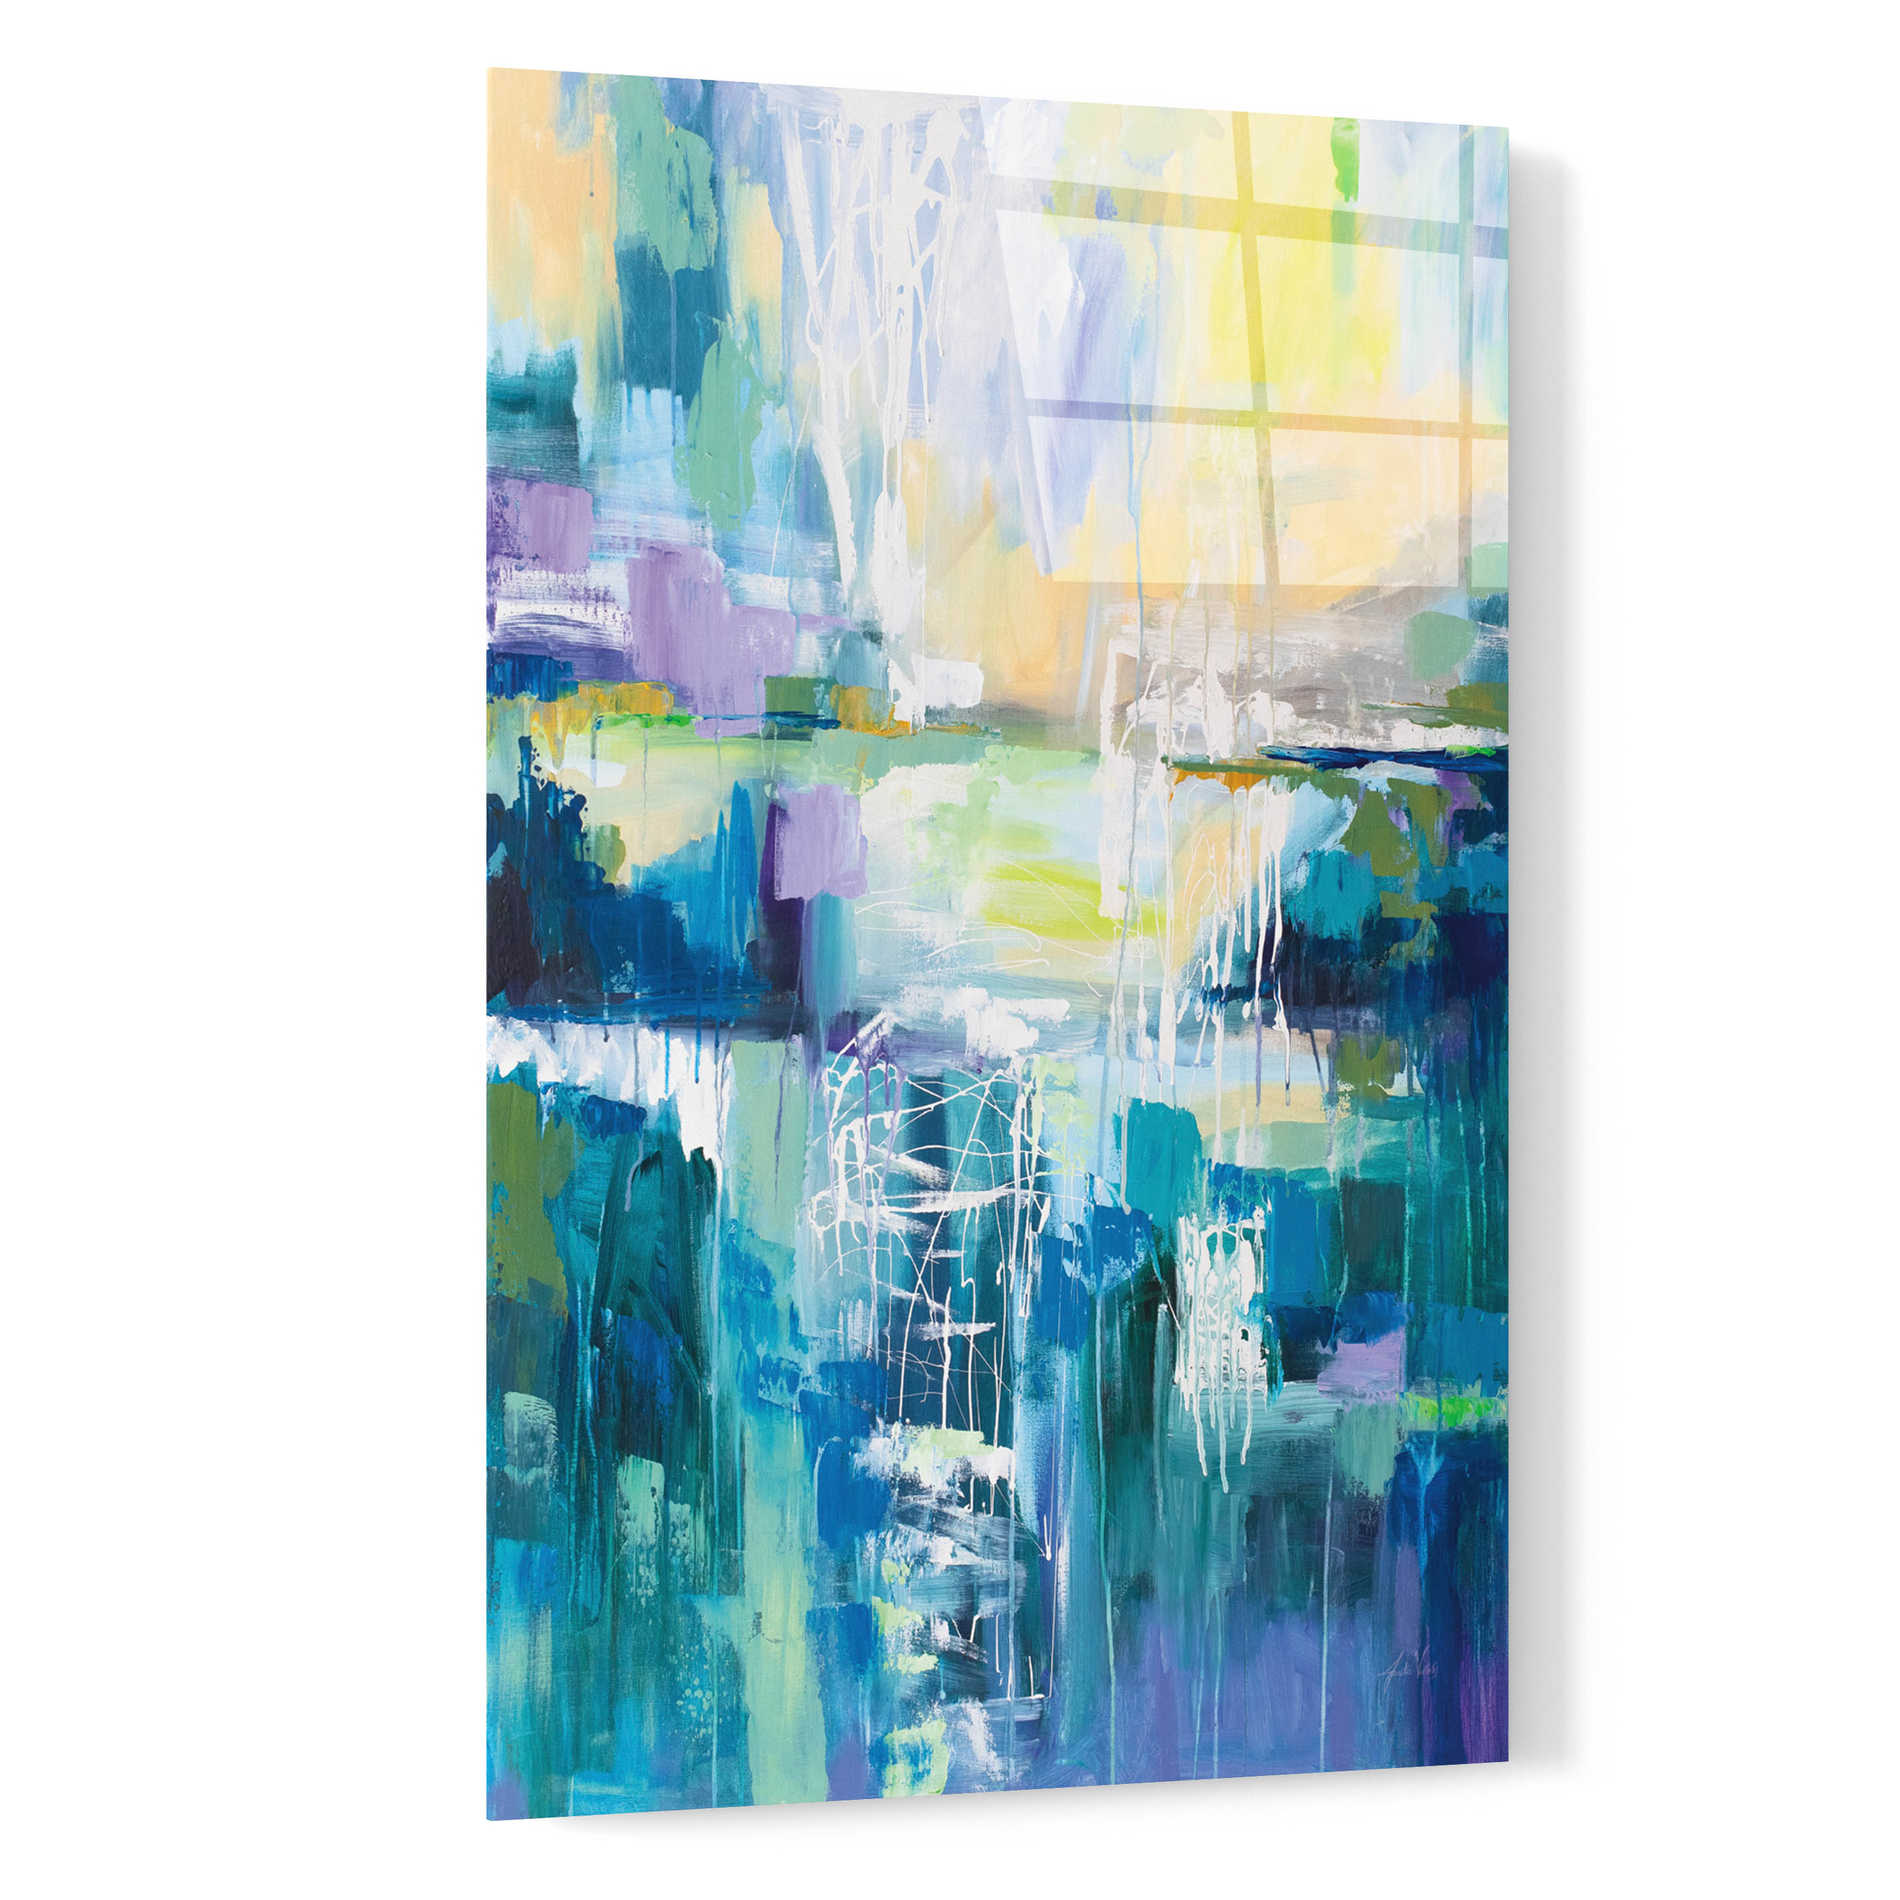 Epic Art 'Into the Water' by Jeanette Vertentes, Acrylic Glass Wall Art,16x24